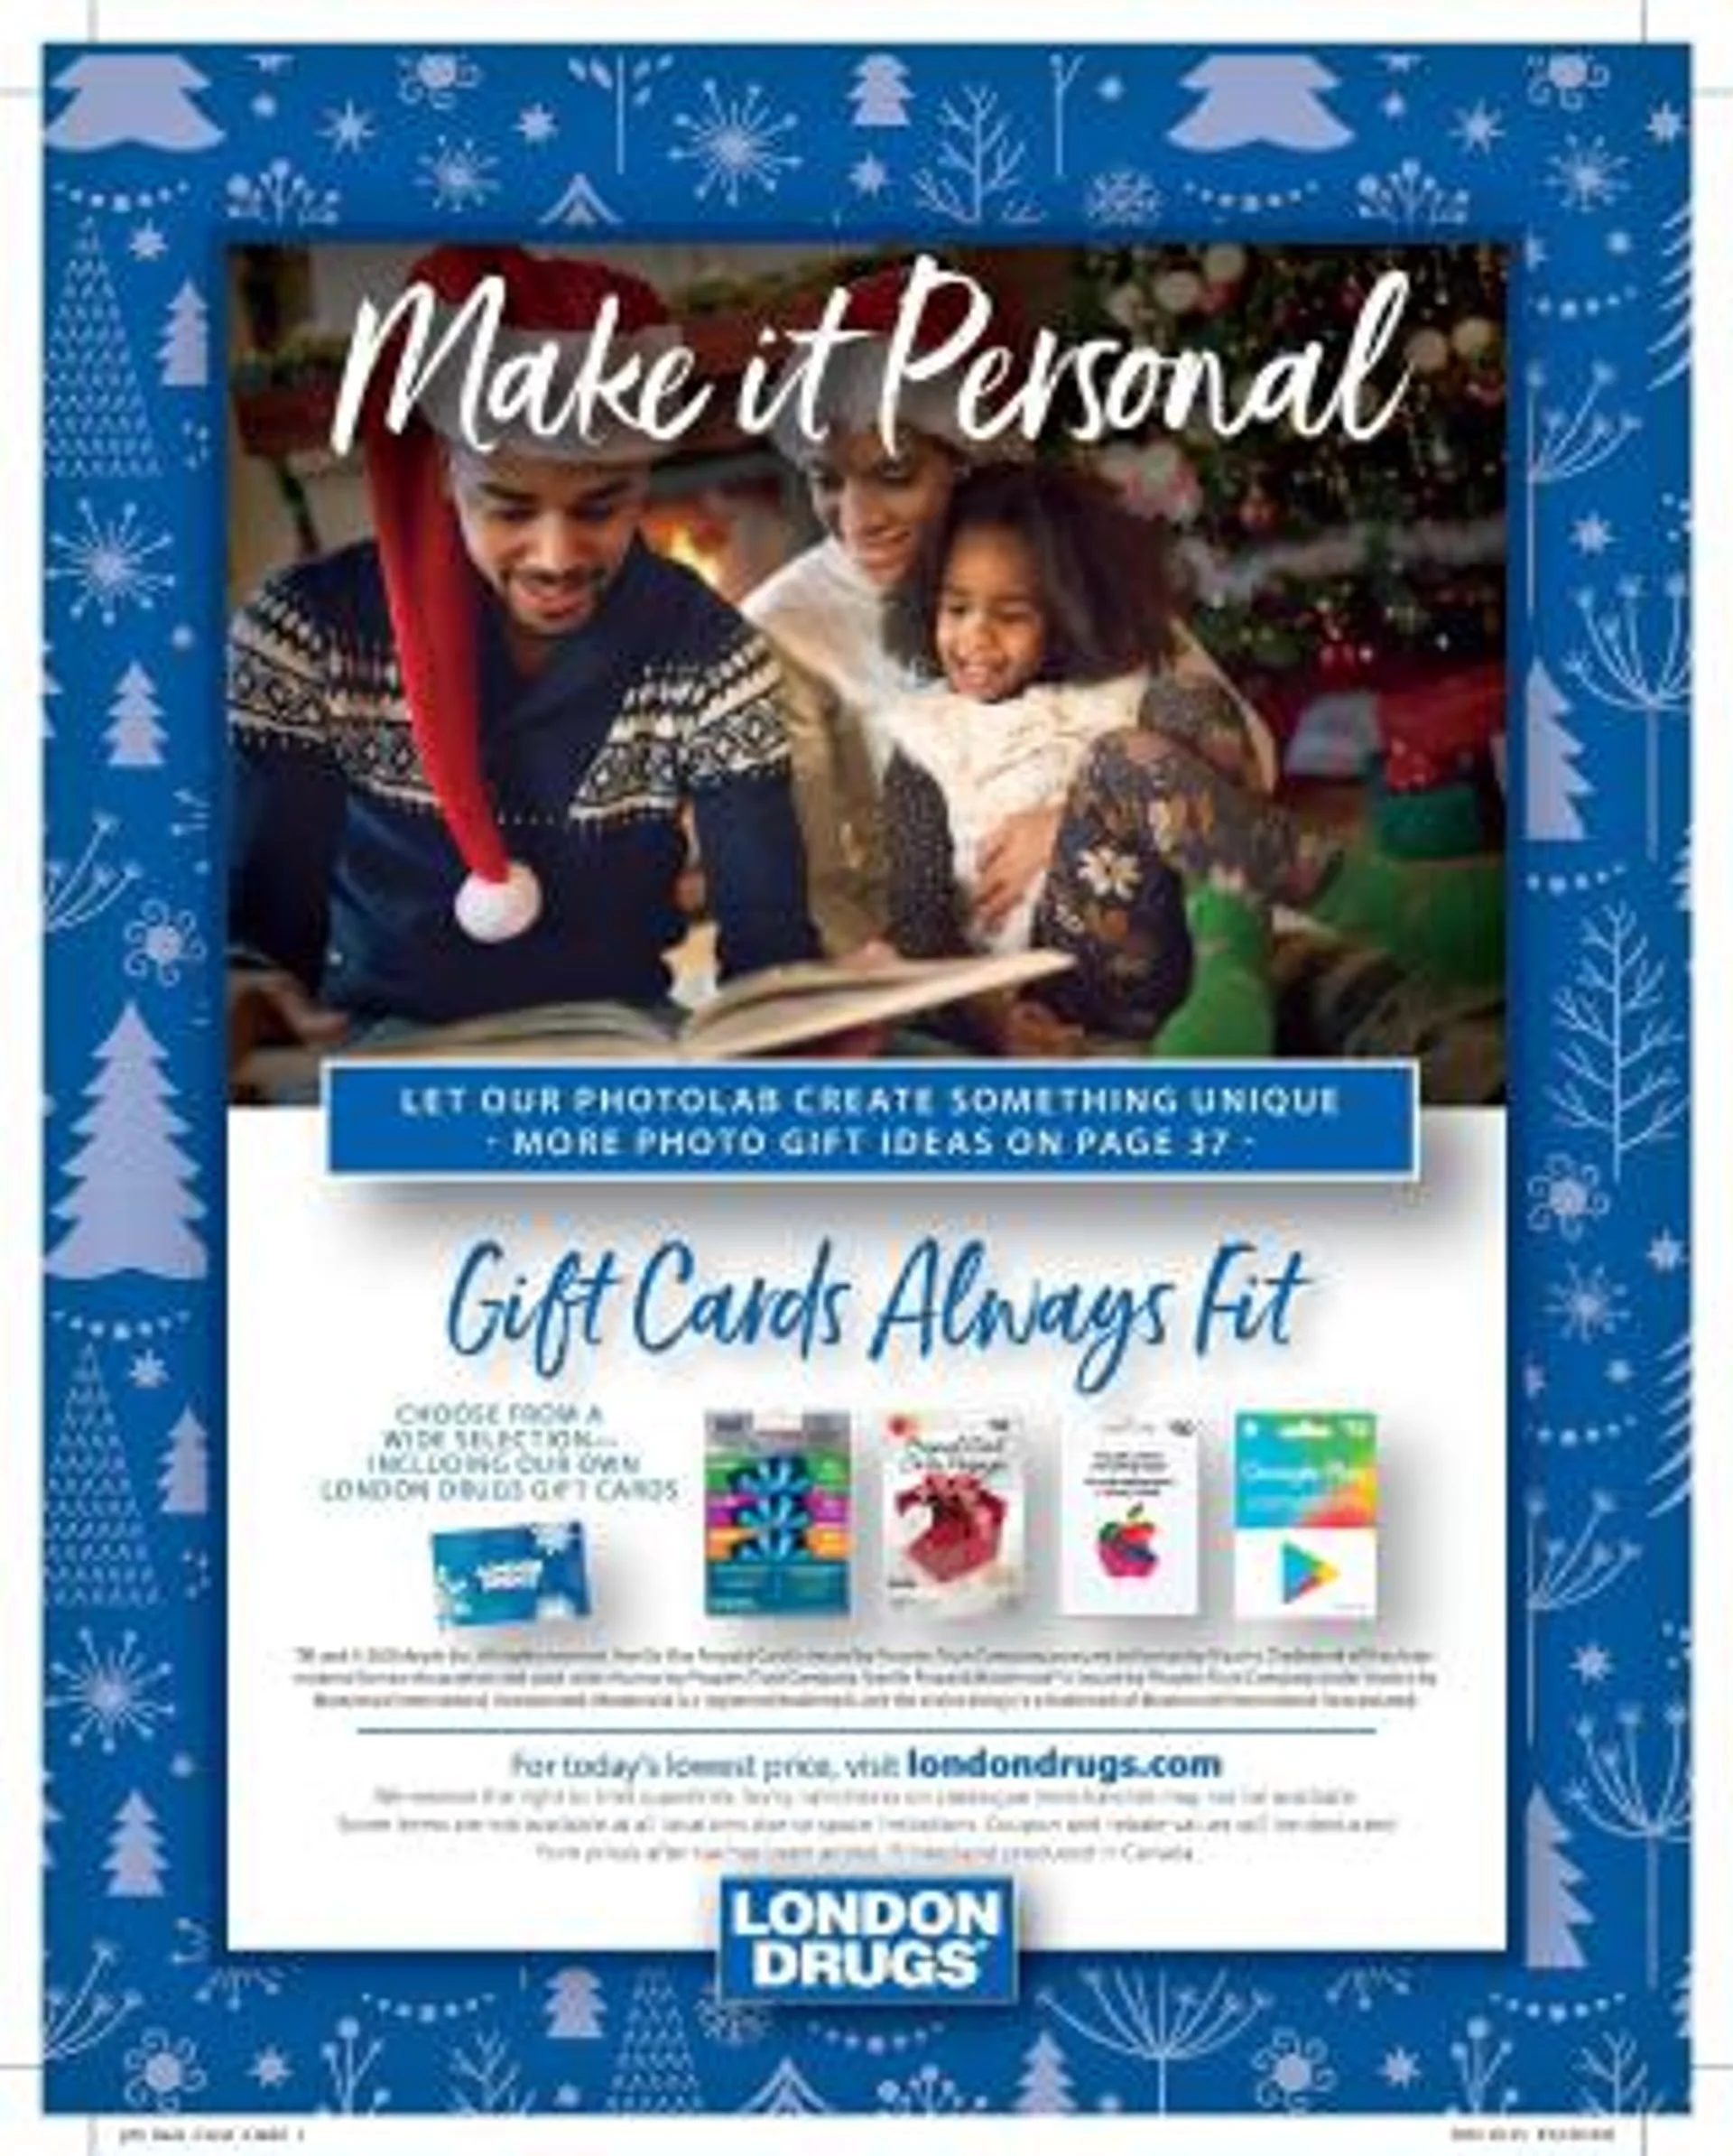 London Drugs Flyer - Holiday Gift Guide - 16